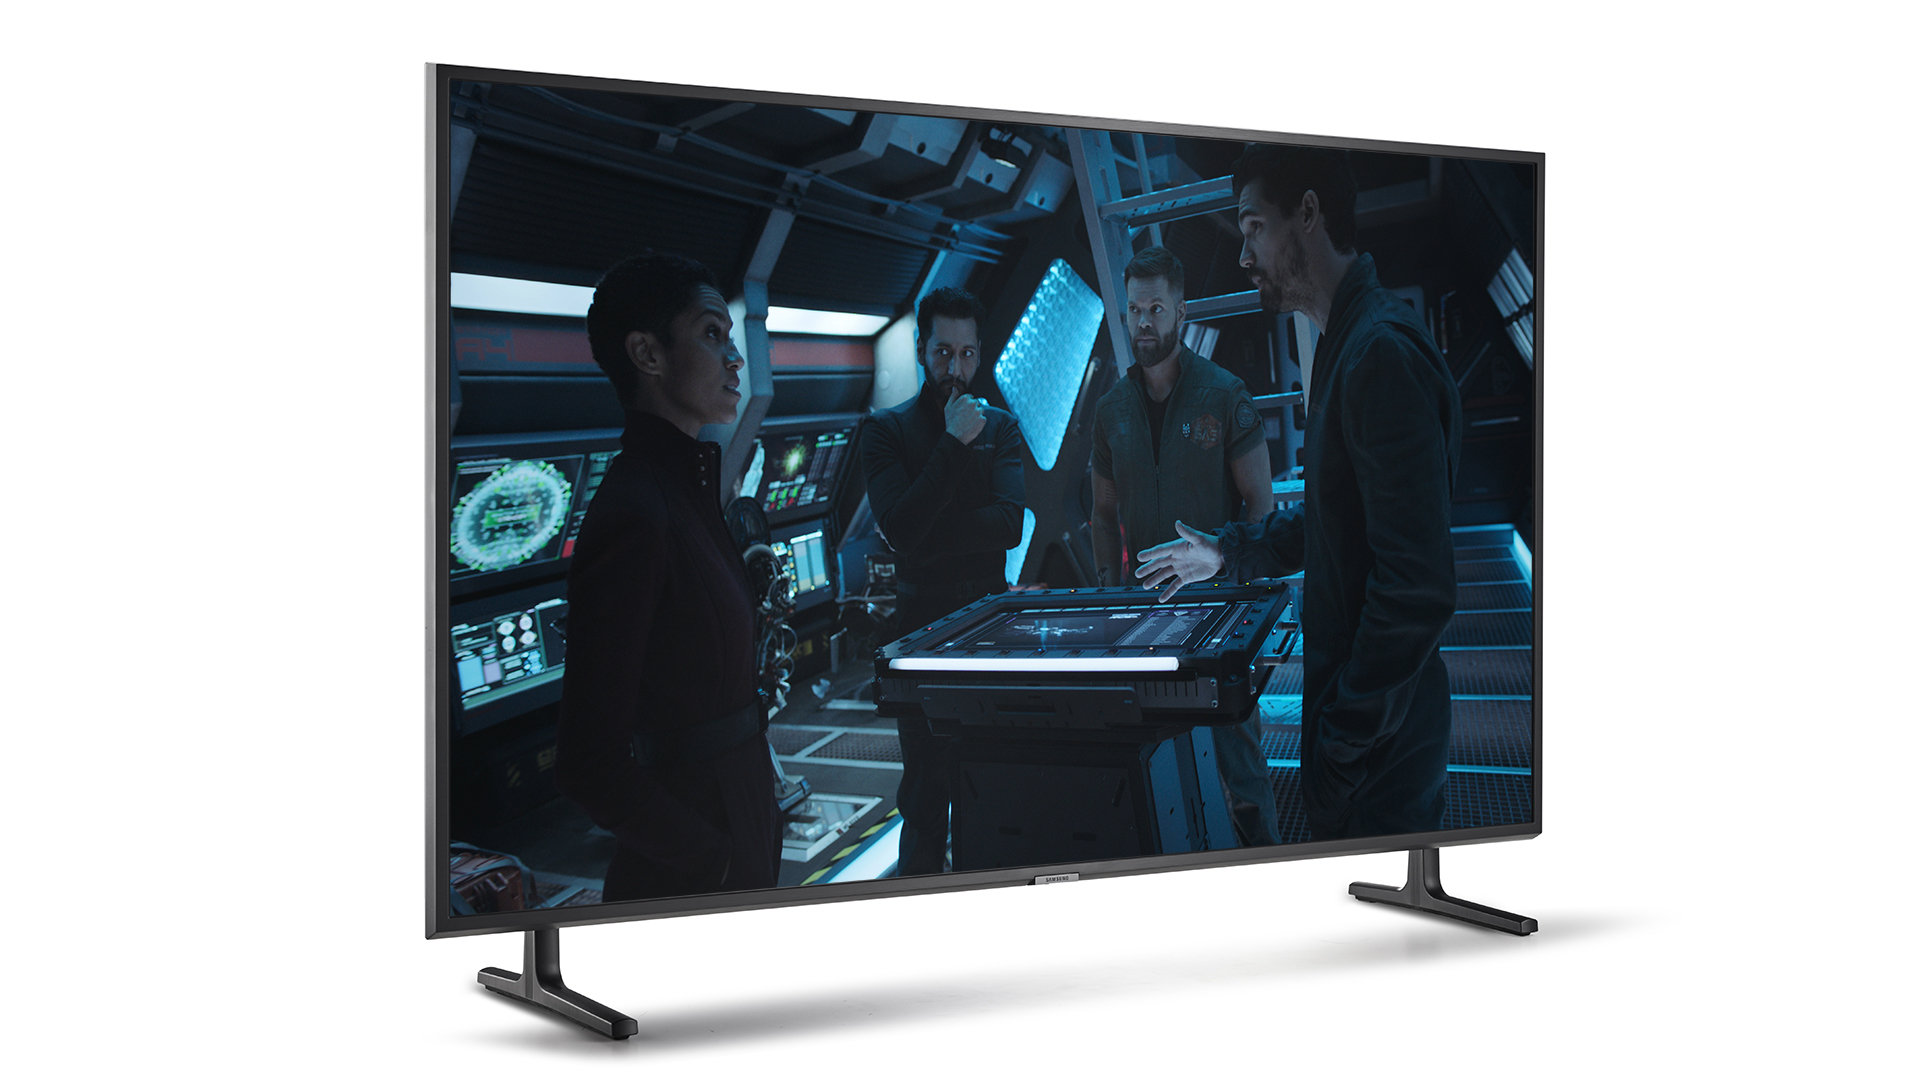 OLED vs LED vs LCD which is the best TV technology? What HiFi?